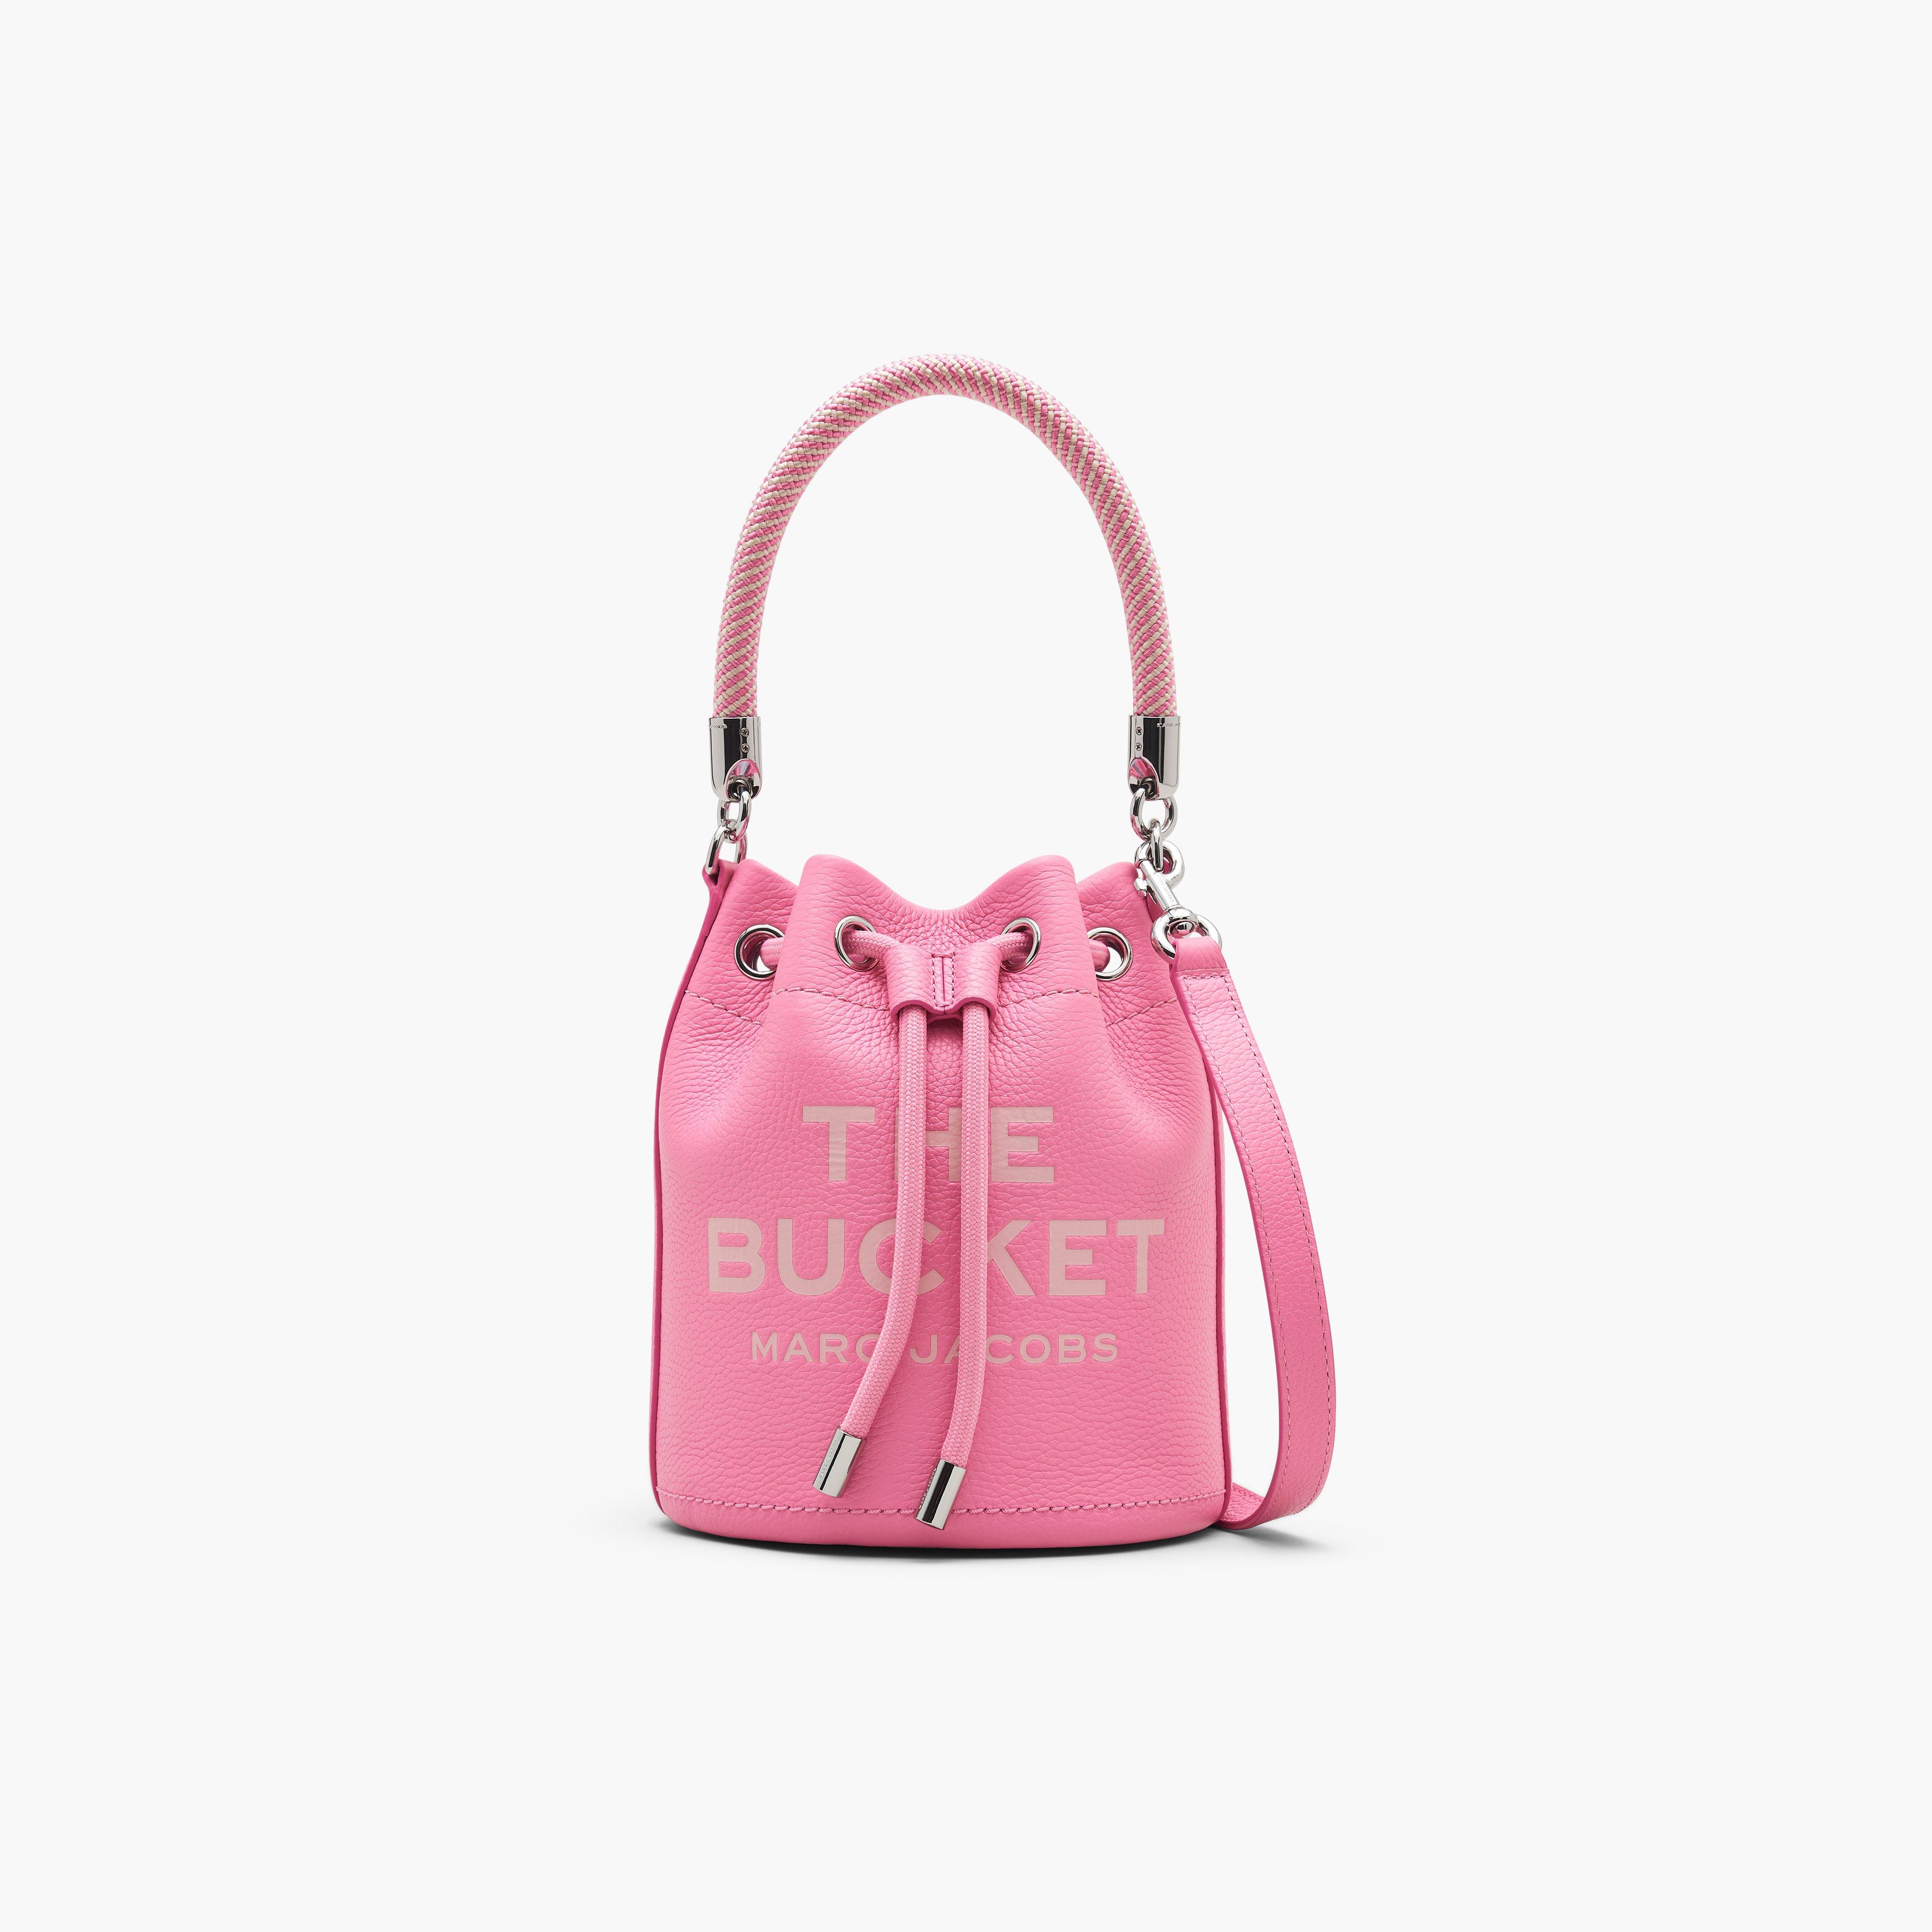 Marc by Marc jacobs The Leather Bucket Bag,PETAL PINK